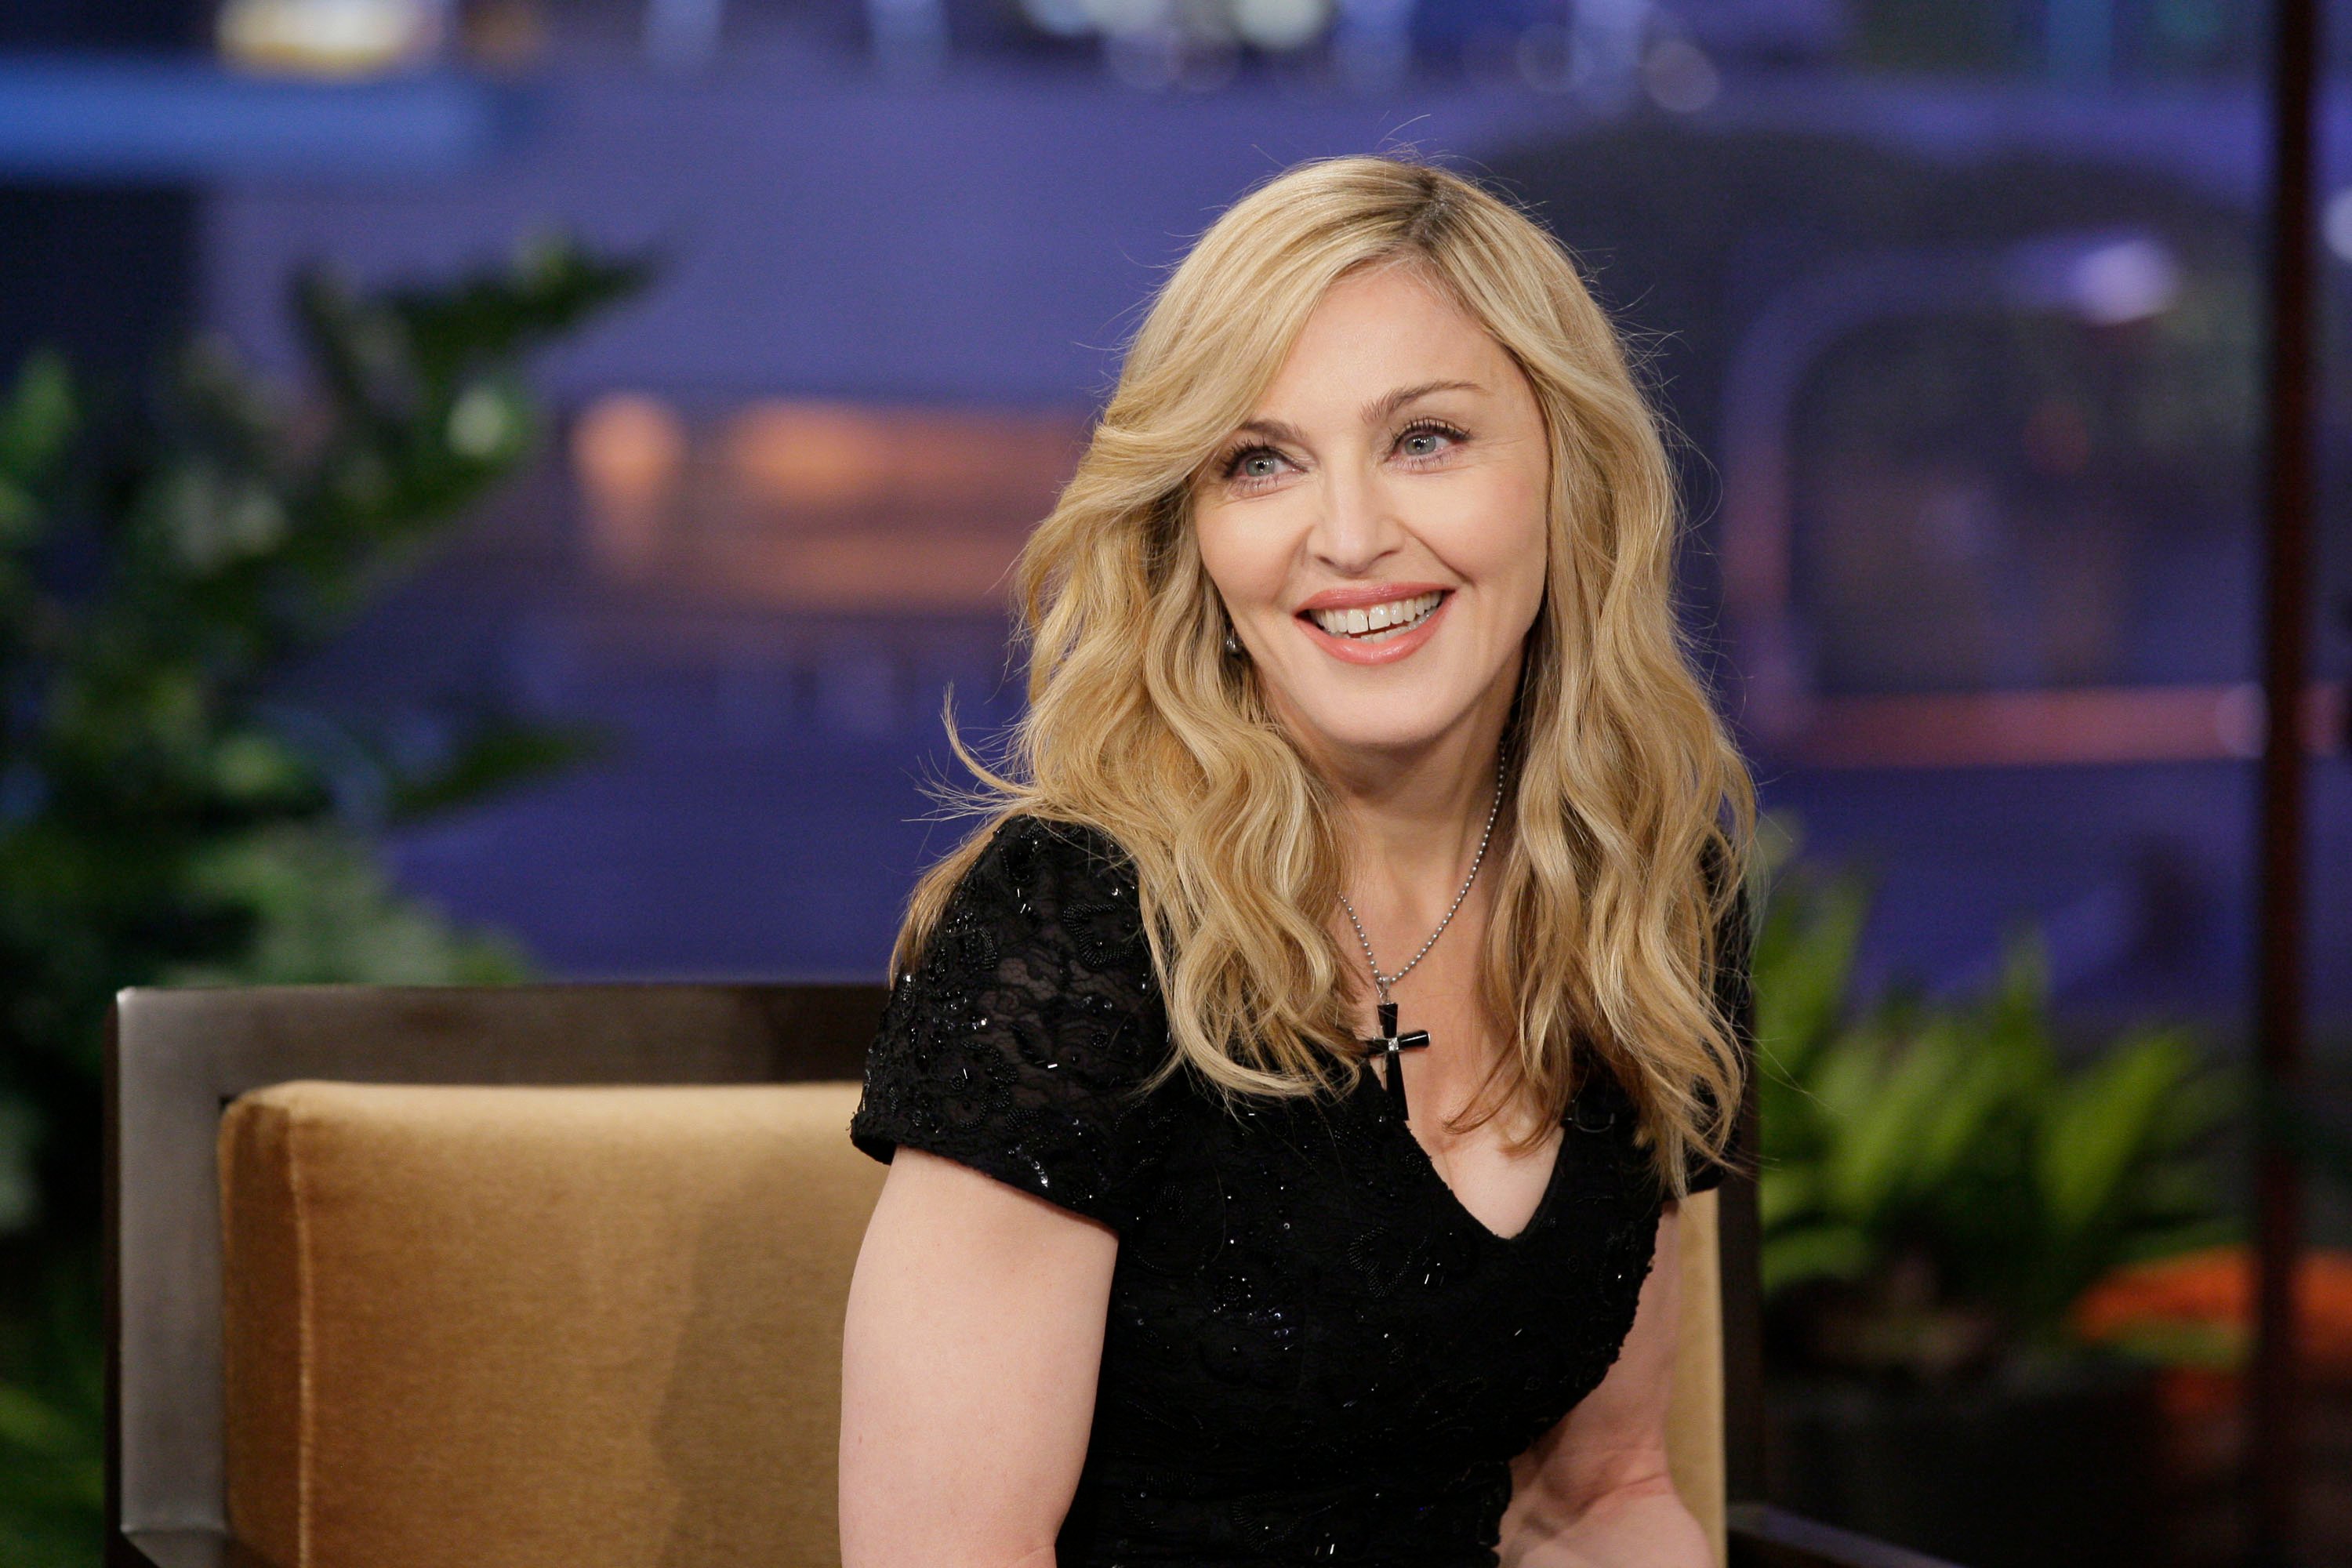 Madonna wearing a black blouse and a cross necklace